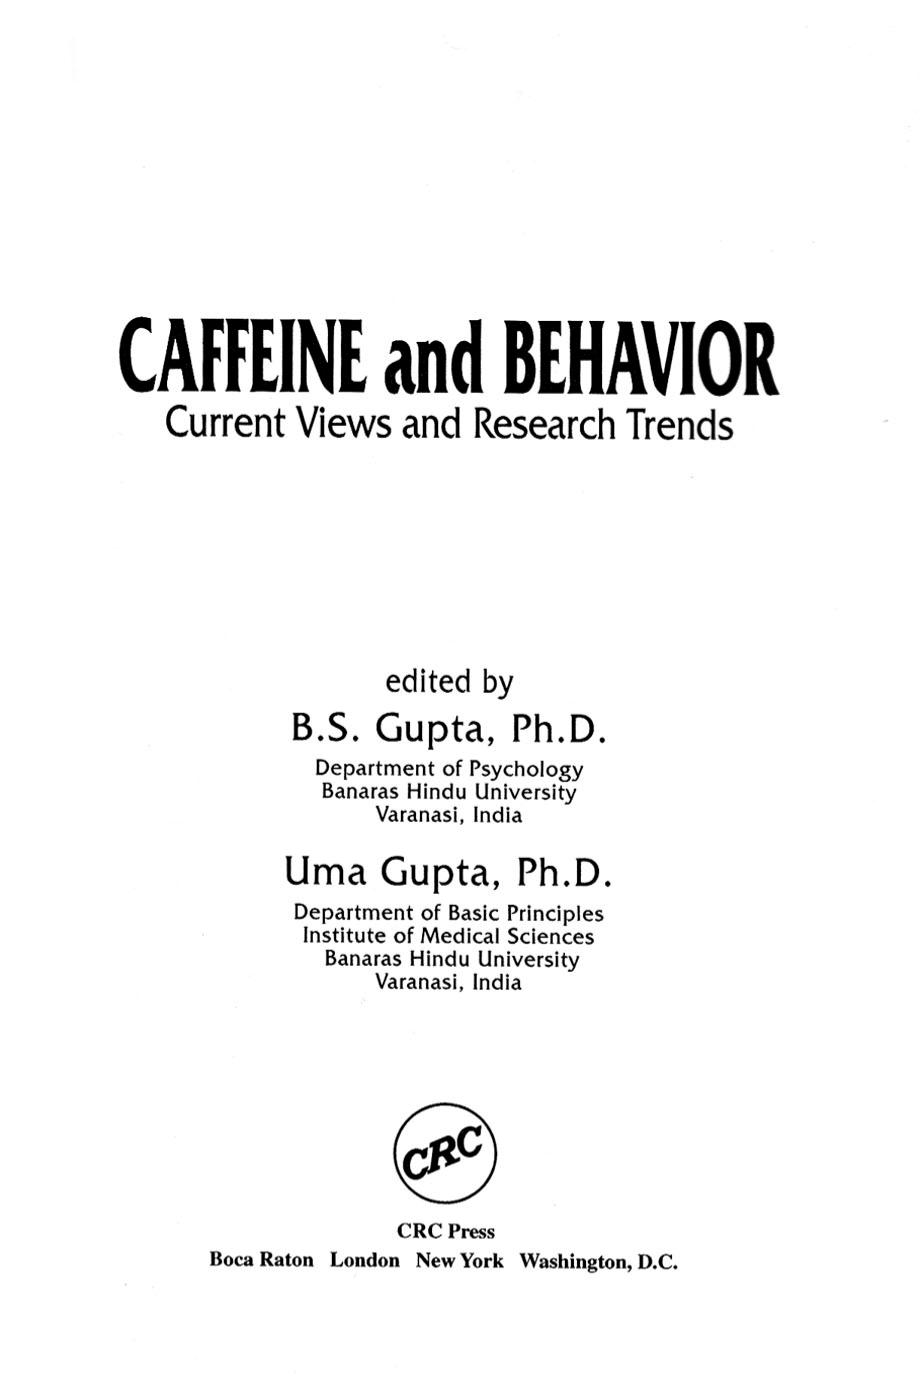 Caffeine and behavior : current views and research trends